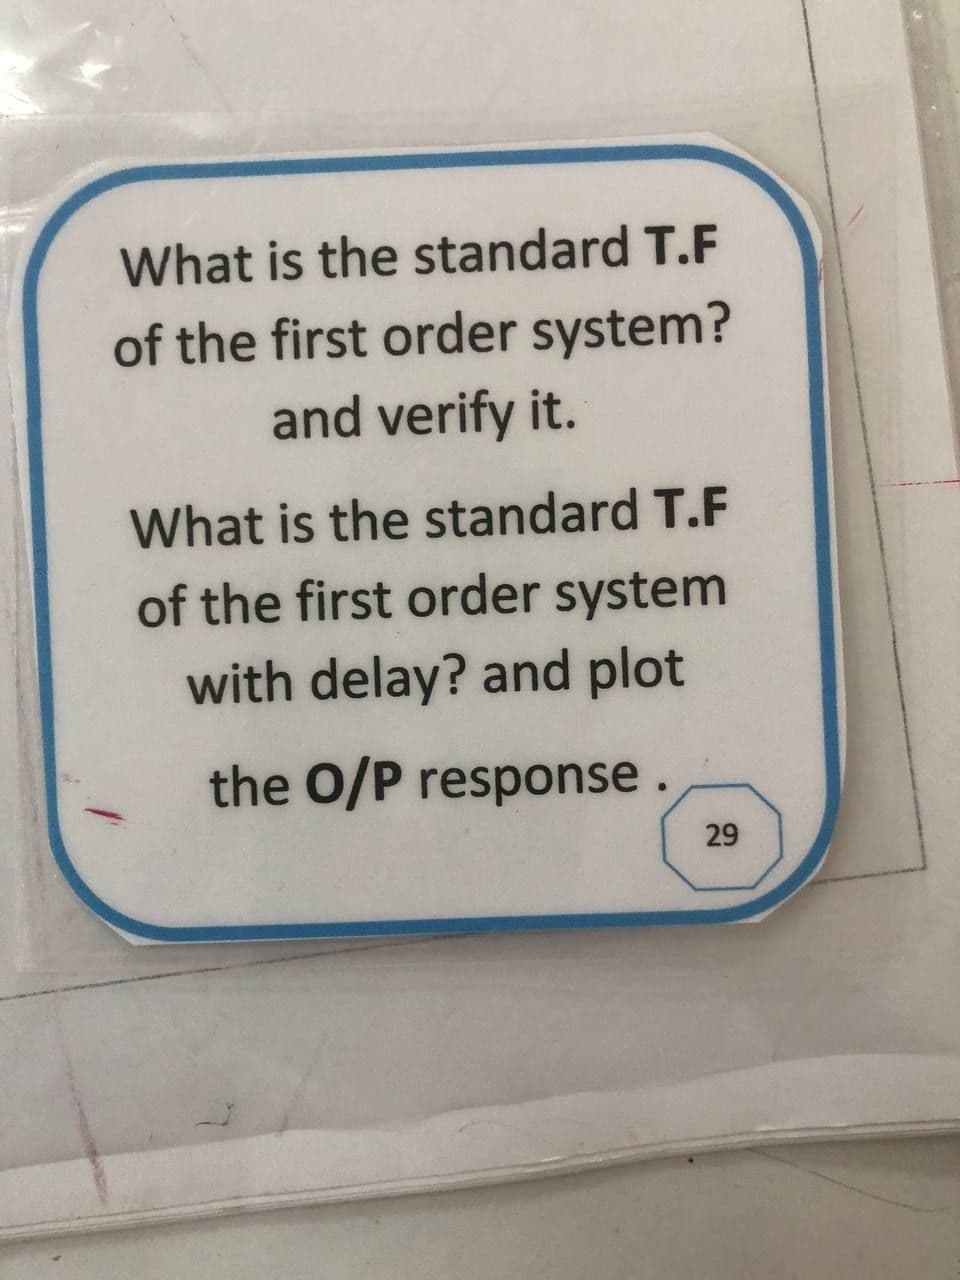 What is the standard T.F
of the first order system?
and verify it.
What is the standard T.F
of the first order system
with delay? and plot
the O/P response
29